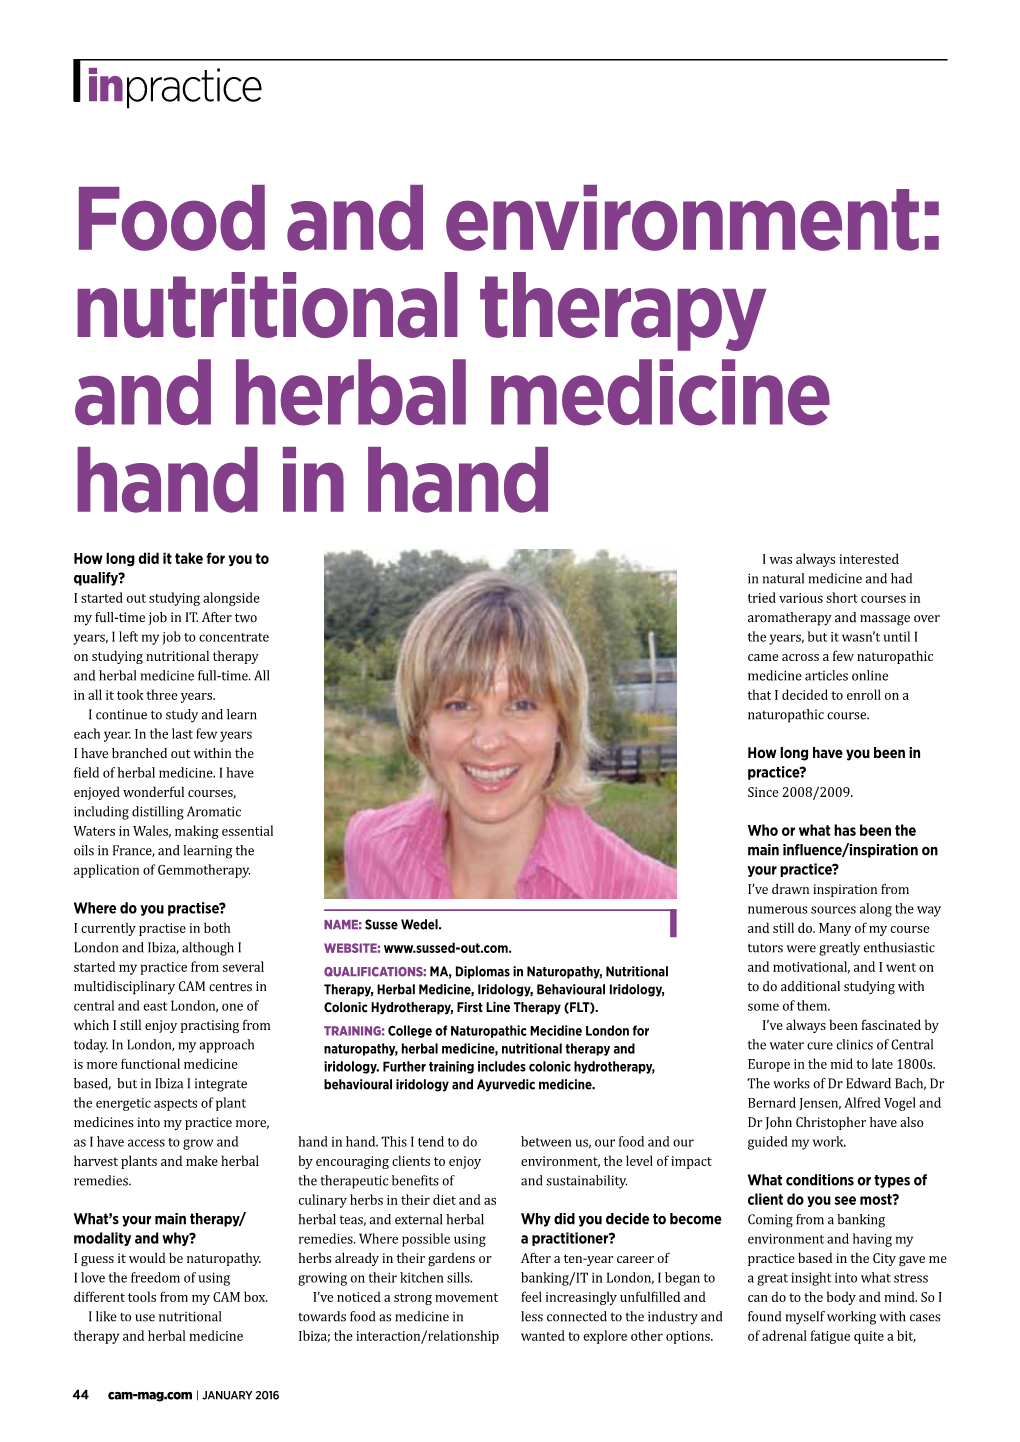 Nutritional Therapy and Herbal Medicine Hand in Hand